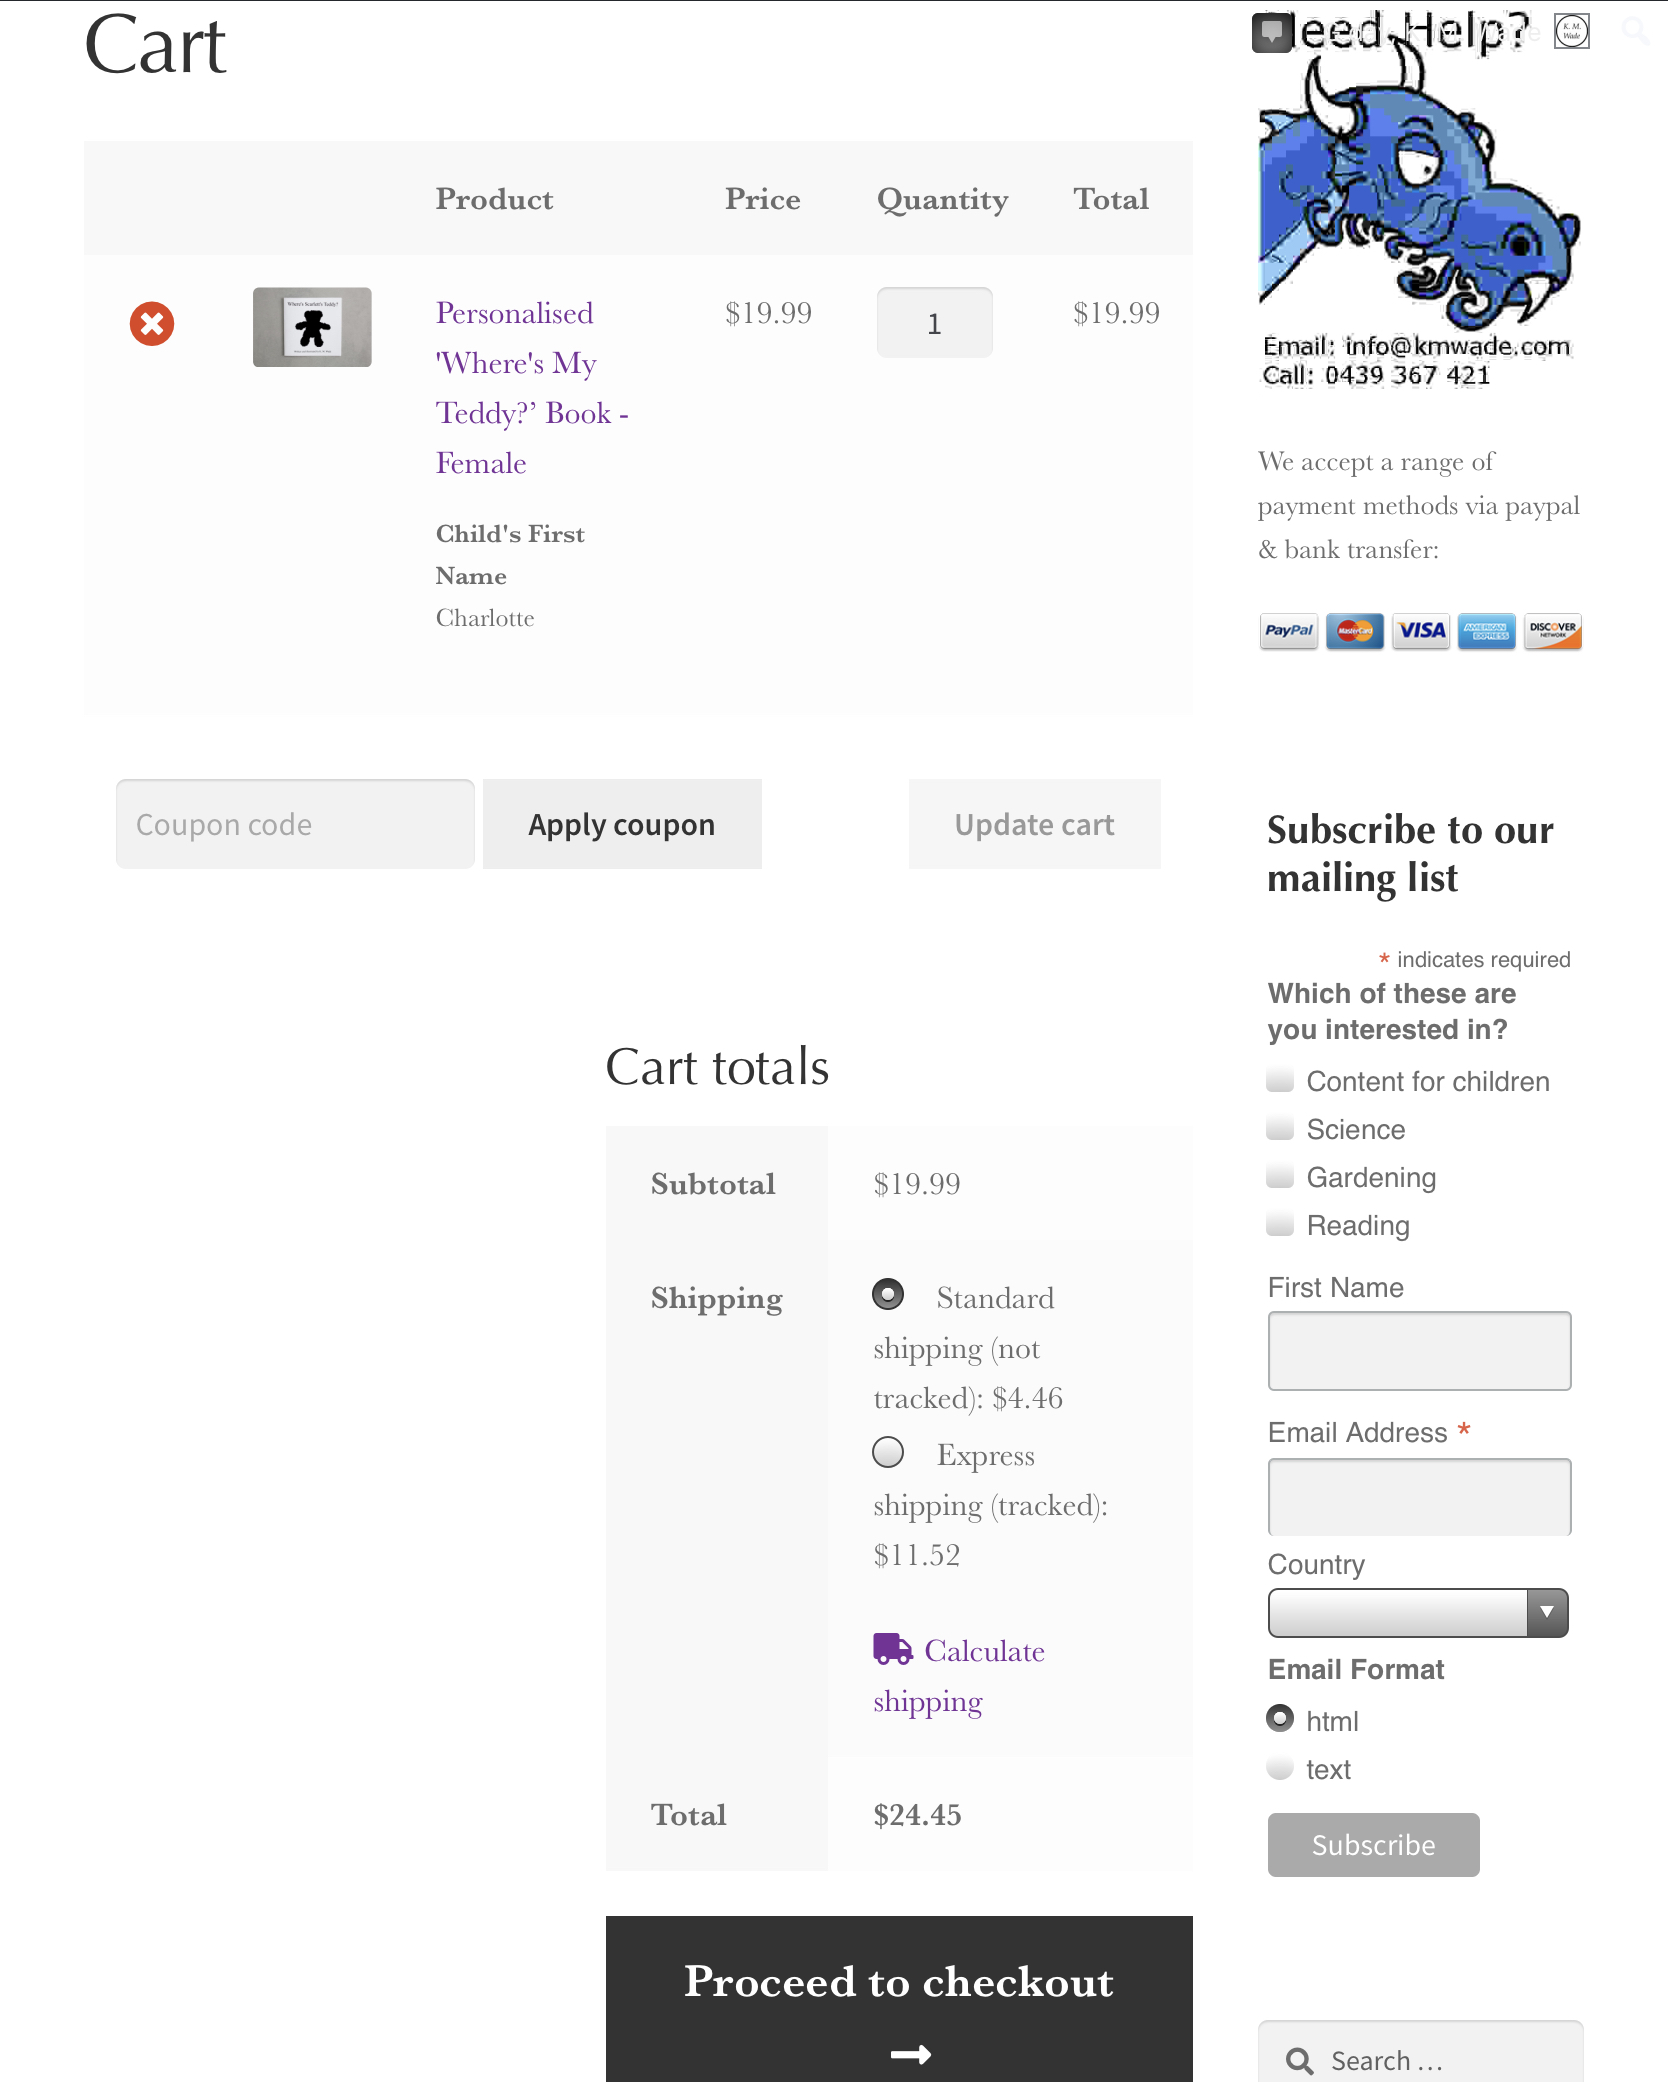 The K. M. Wade shopping cart page